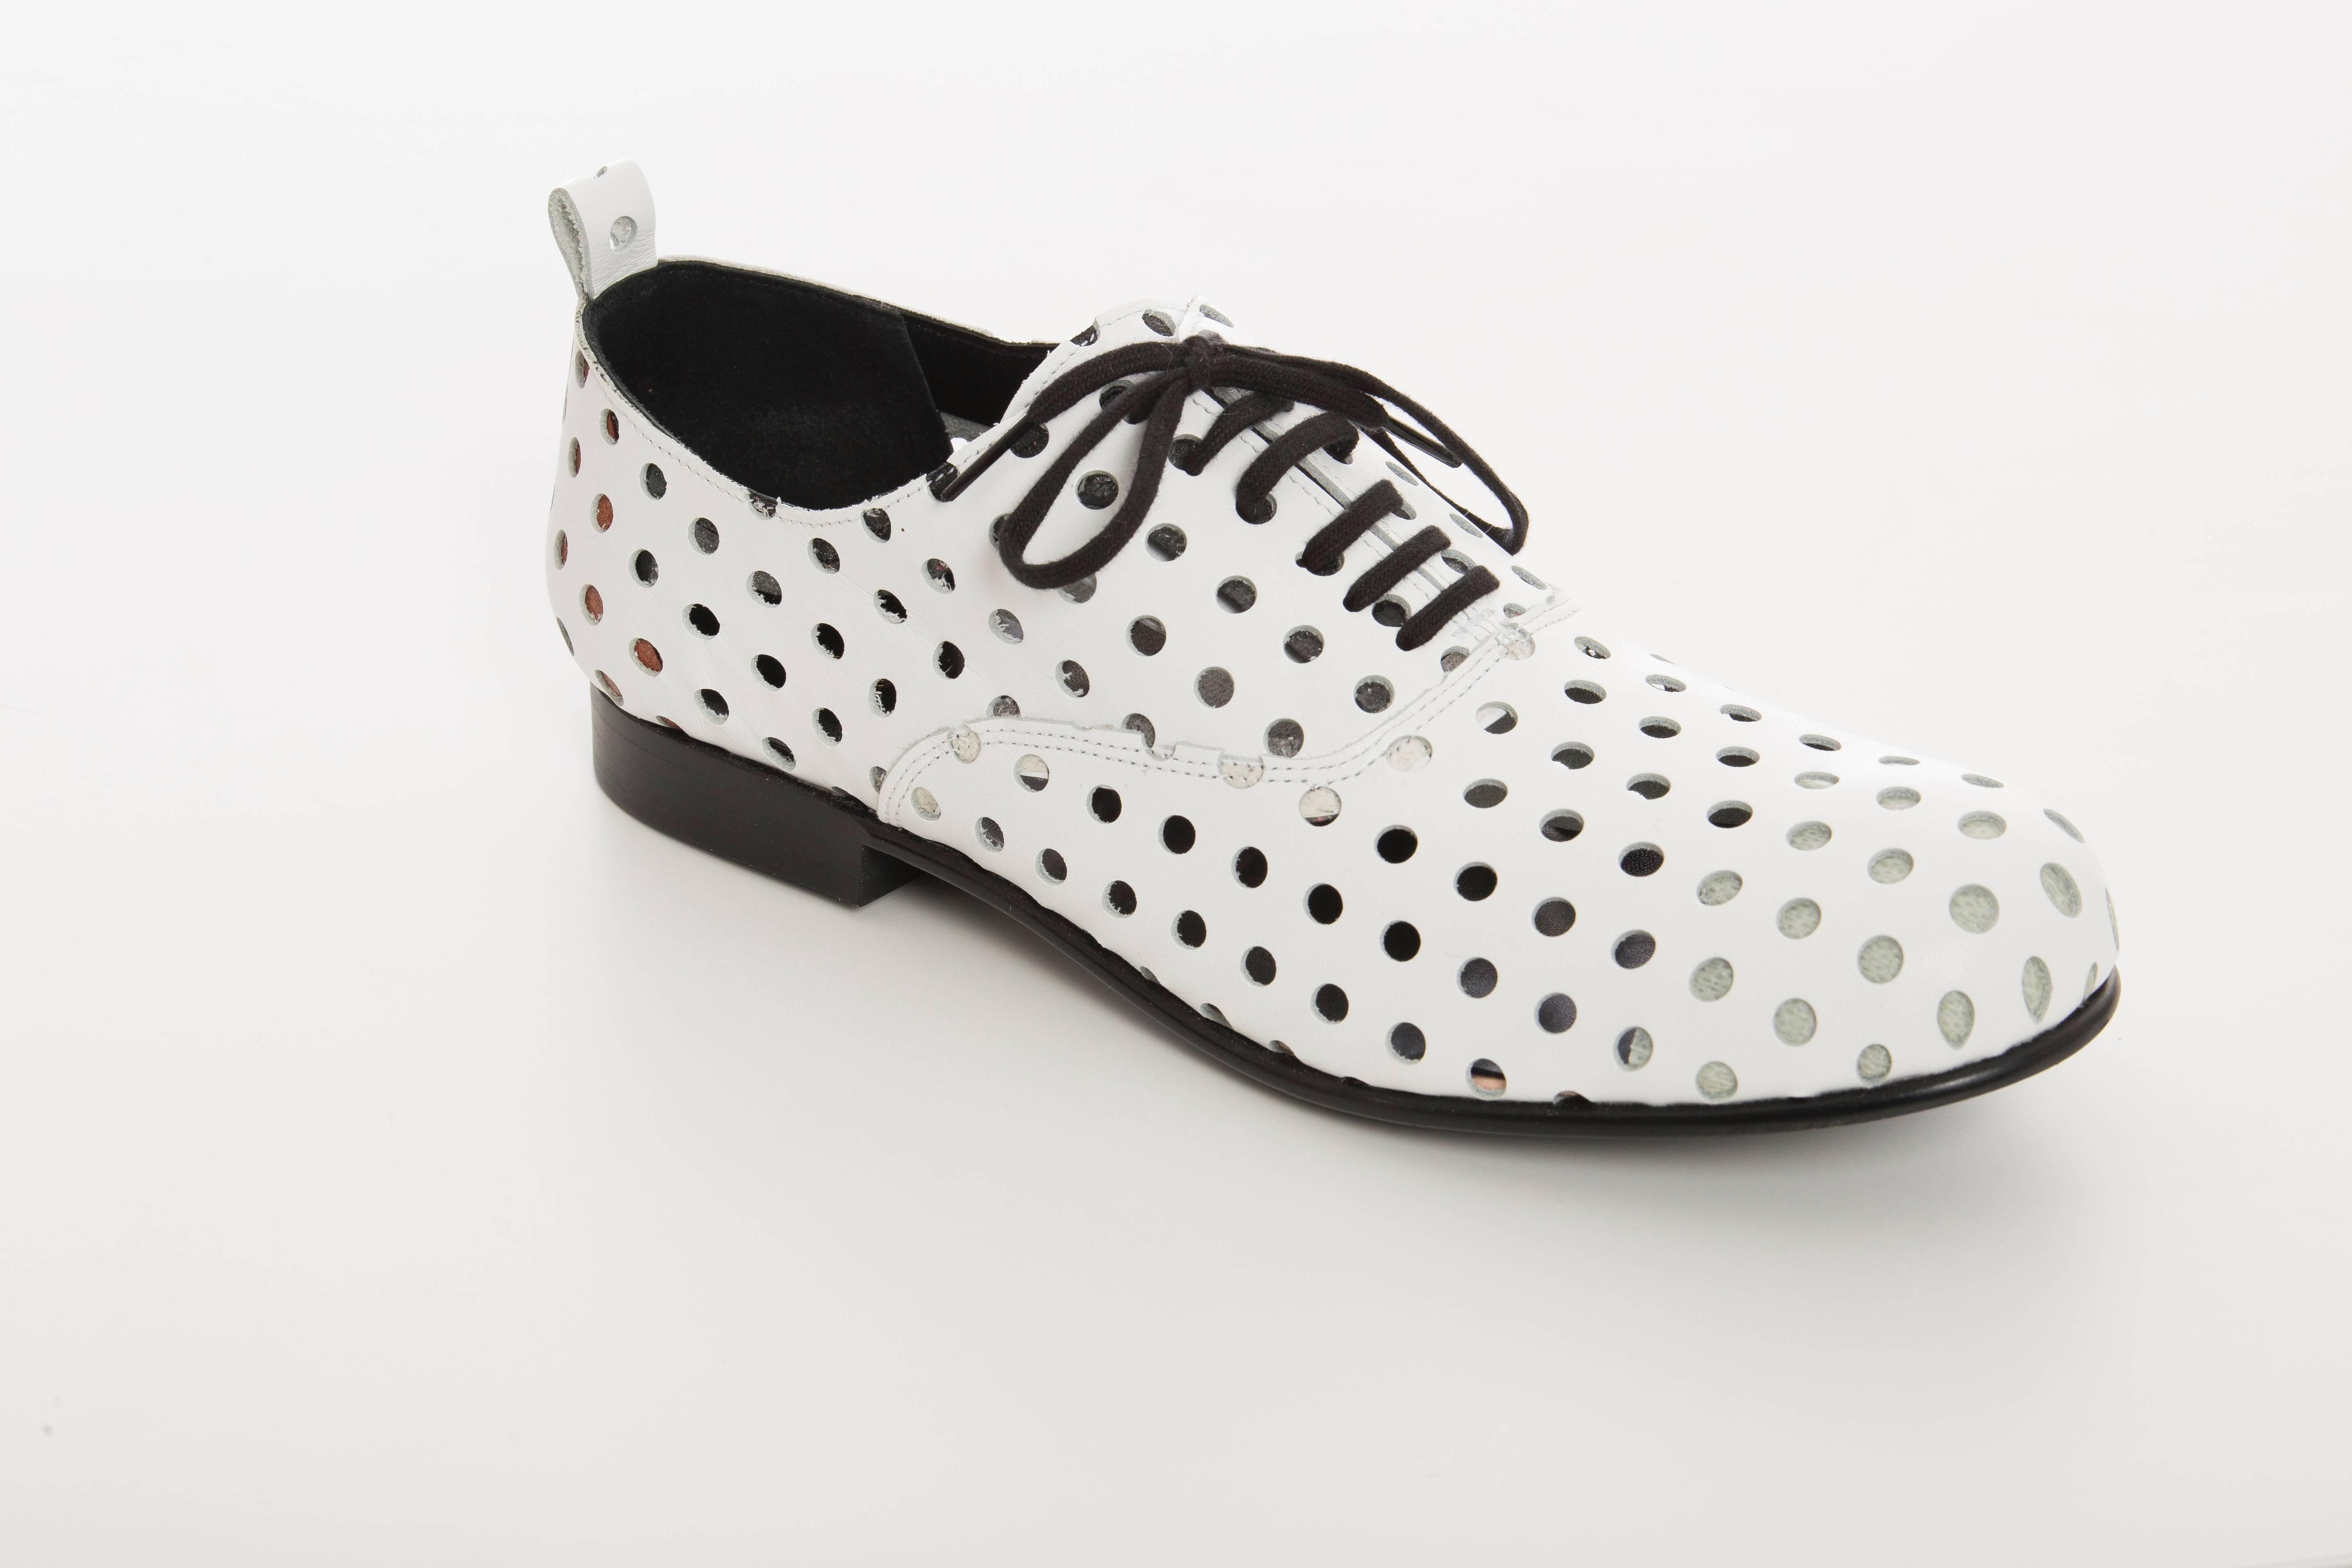  Comme des Garçons, Spring-Summer 2015, white perforated leather oxfords with stacked heels and front lace closure. Includes box.

Japan 26
US 8